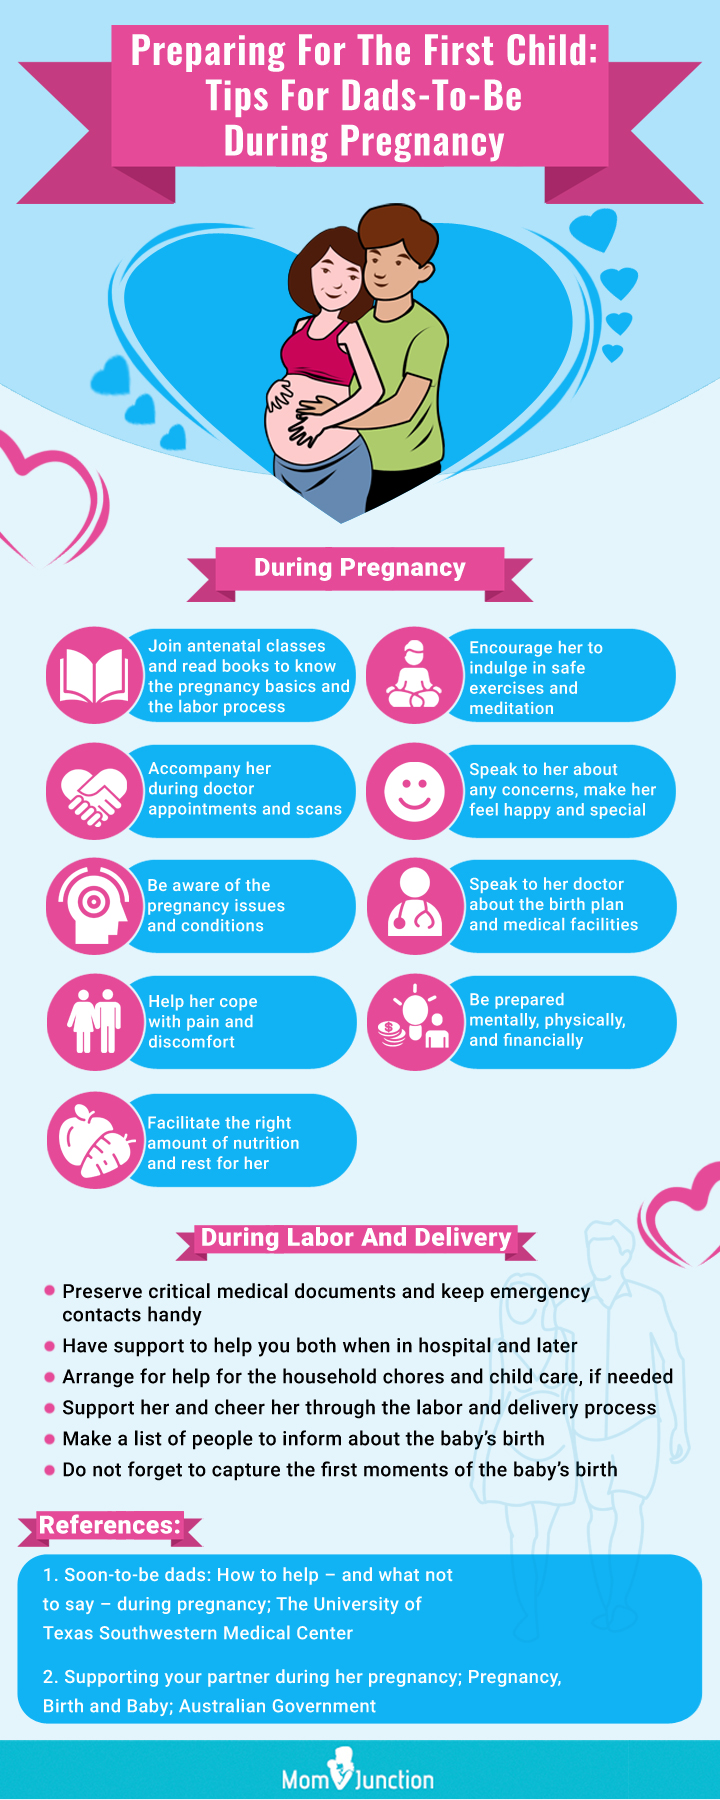 https://www.momjunction.com/wp-content/uploads/2014/04/Top-20-Things-To-Know-When-You-Are-Pregnant-For-The-First-Time_Infographic_2-3.jpg